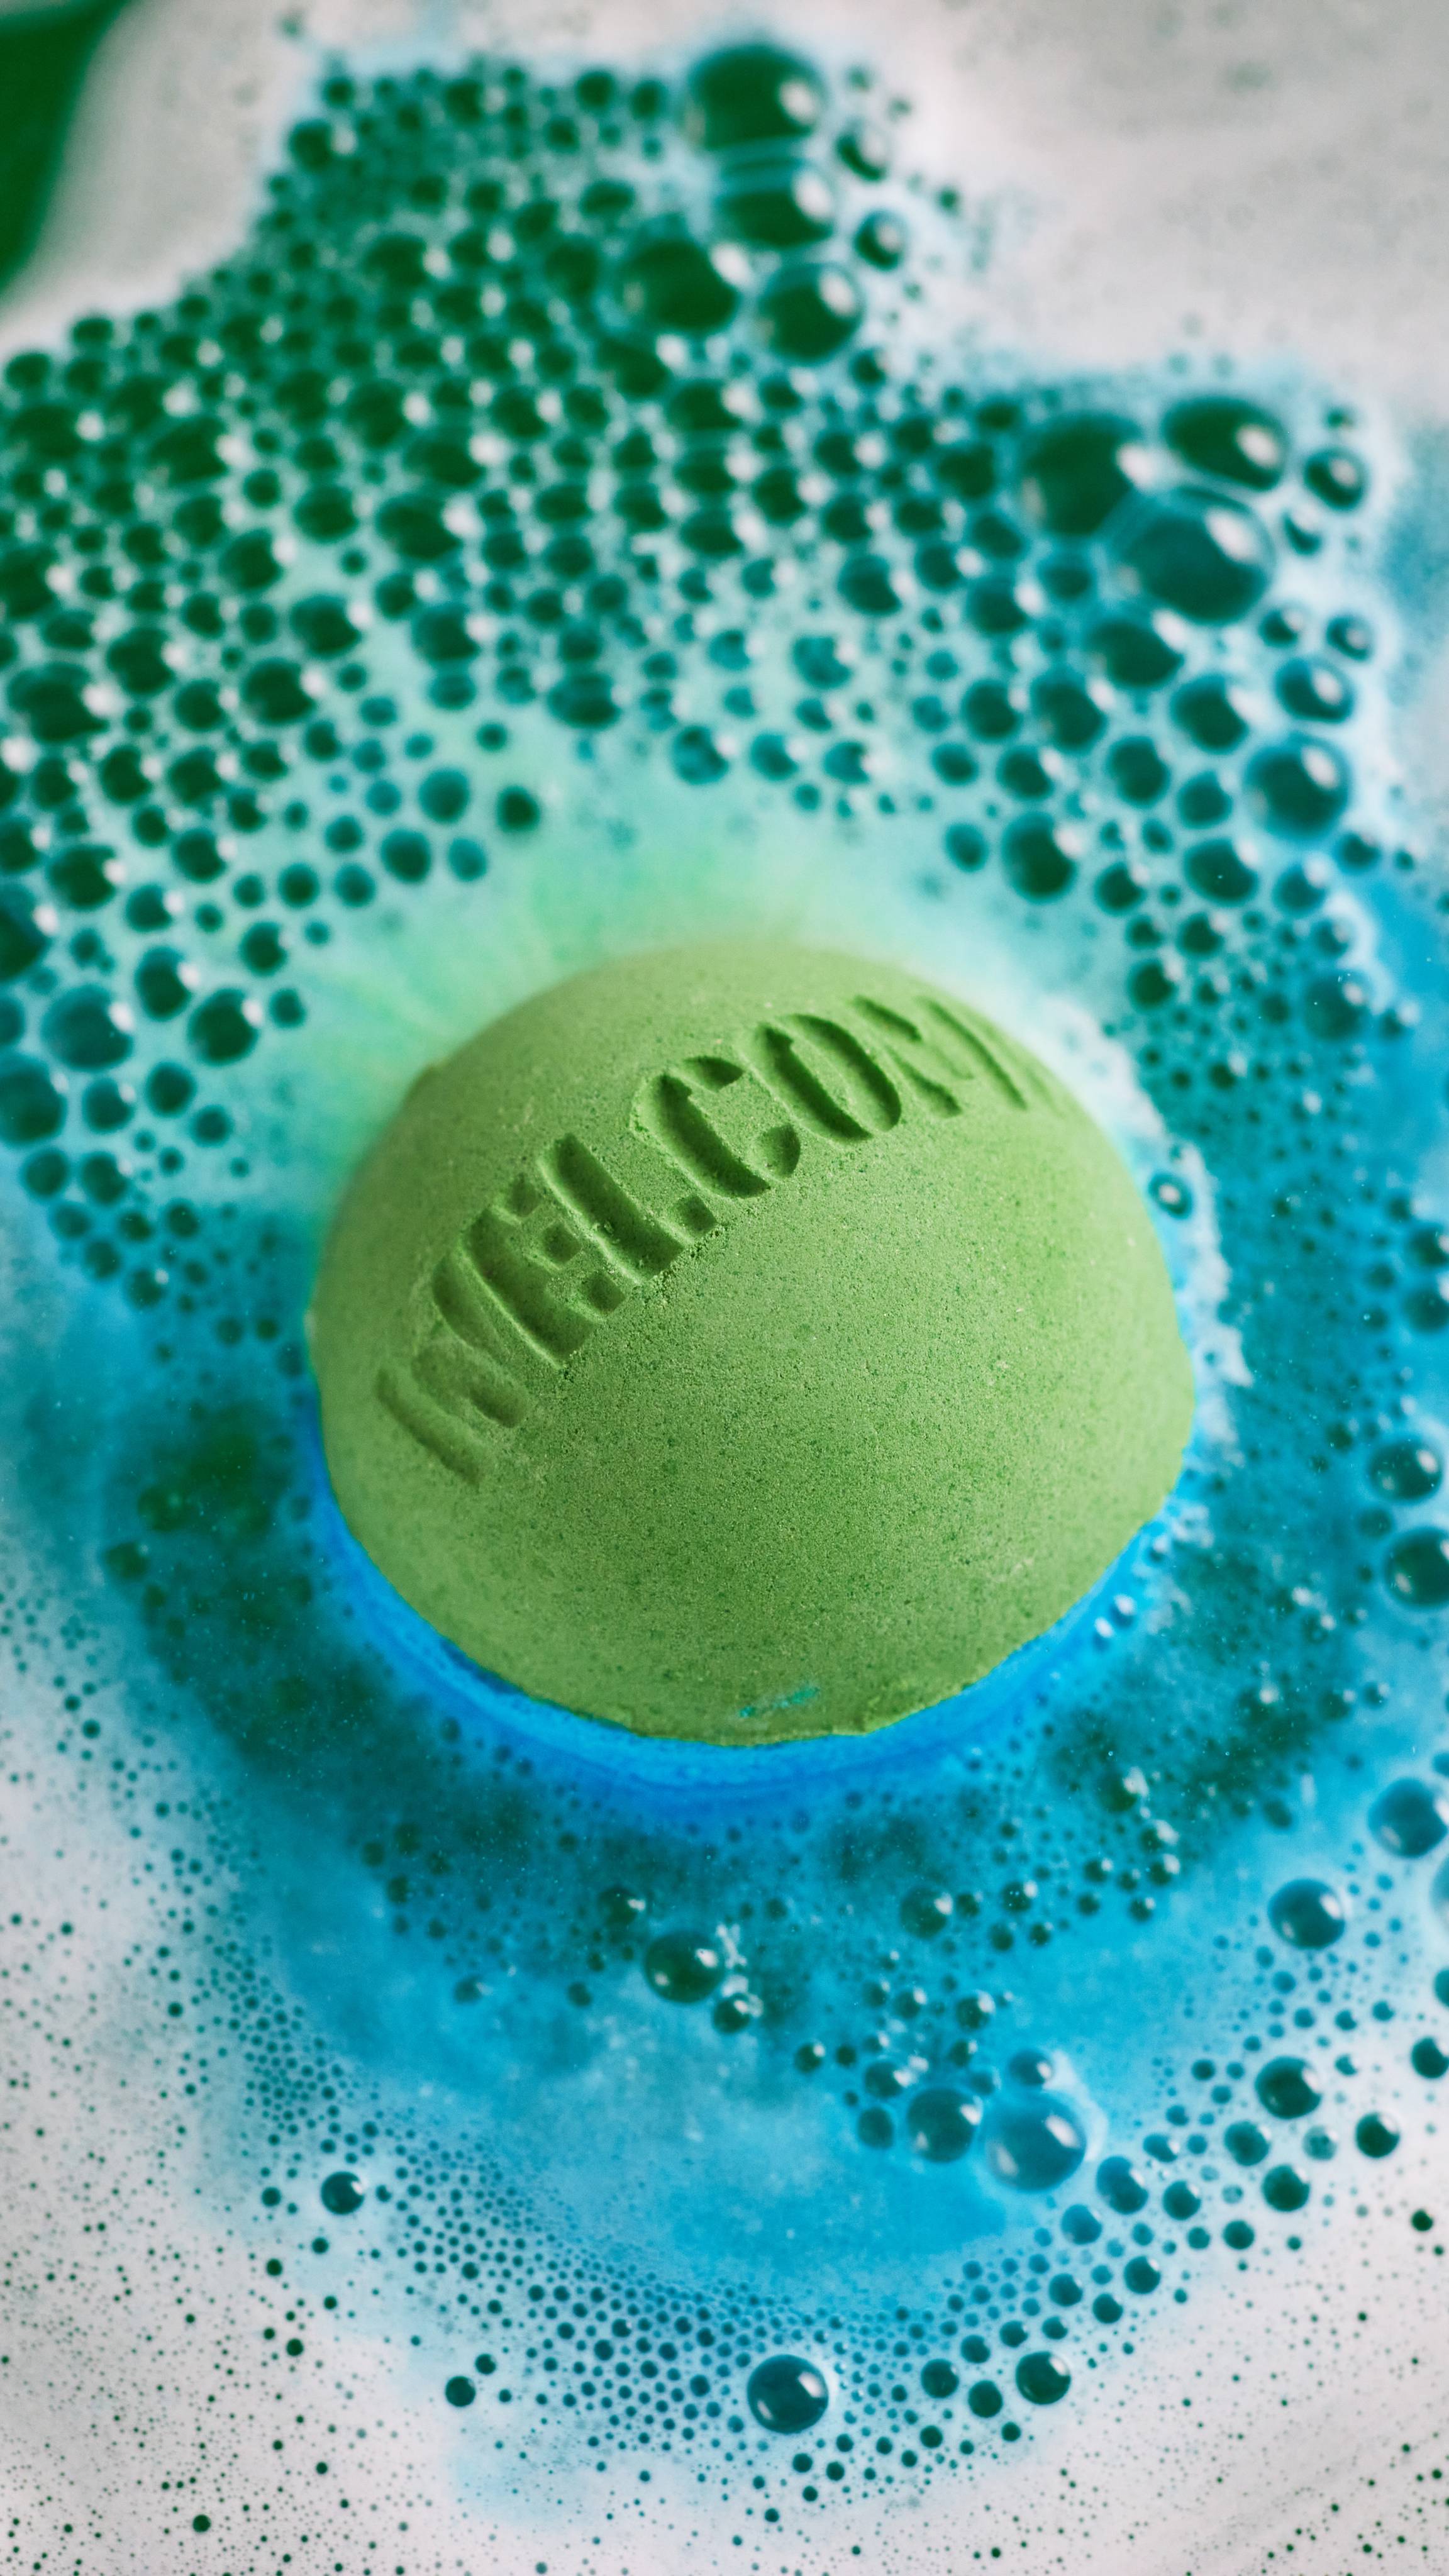 Welcome bath bomb floats among a carpet of bubbles in colourful deep-sea green, blue and teal swirls.